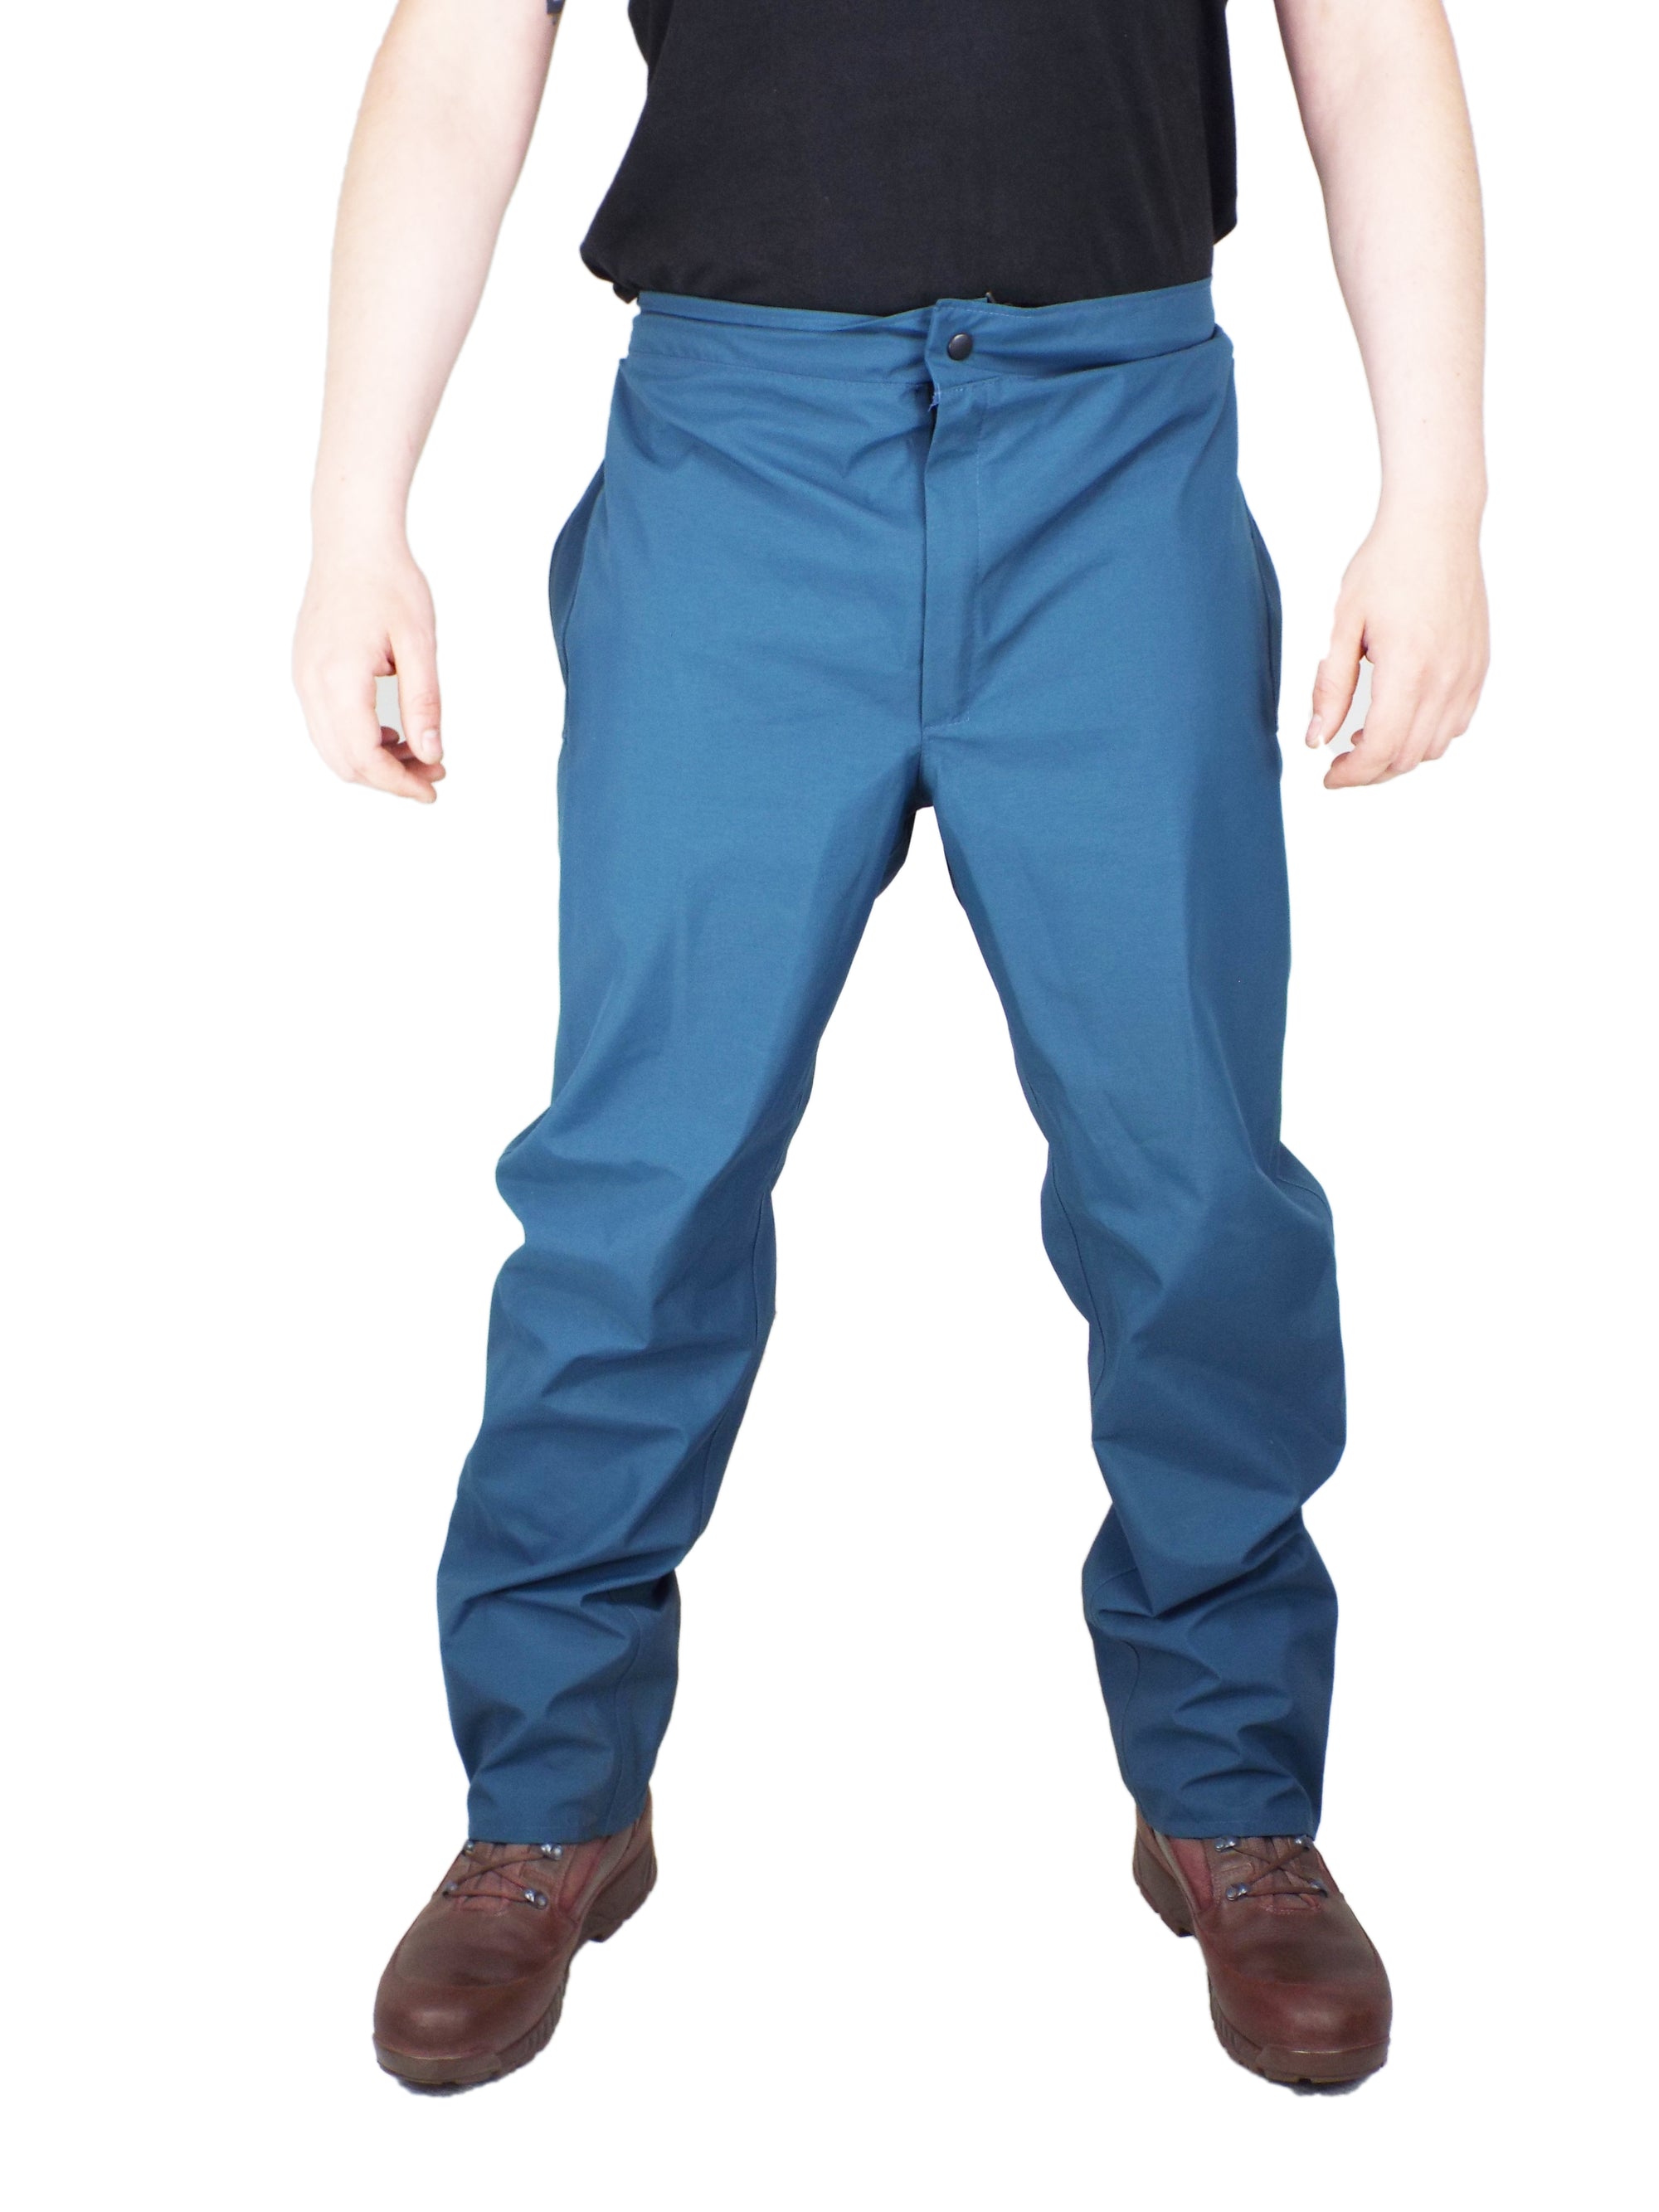 British Royal Air Force Gore-Tex Over-Trousers – Grade 1